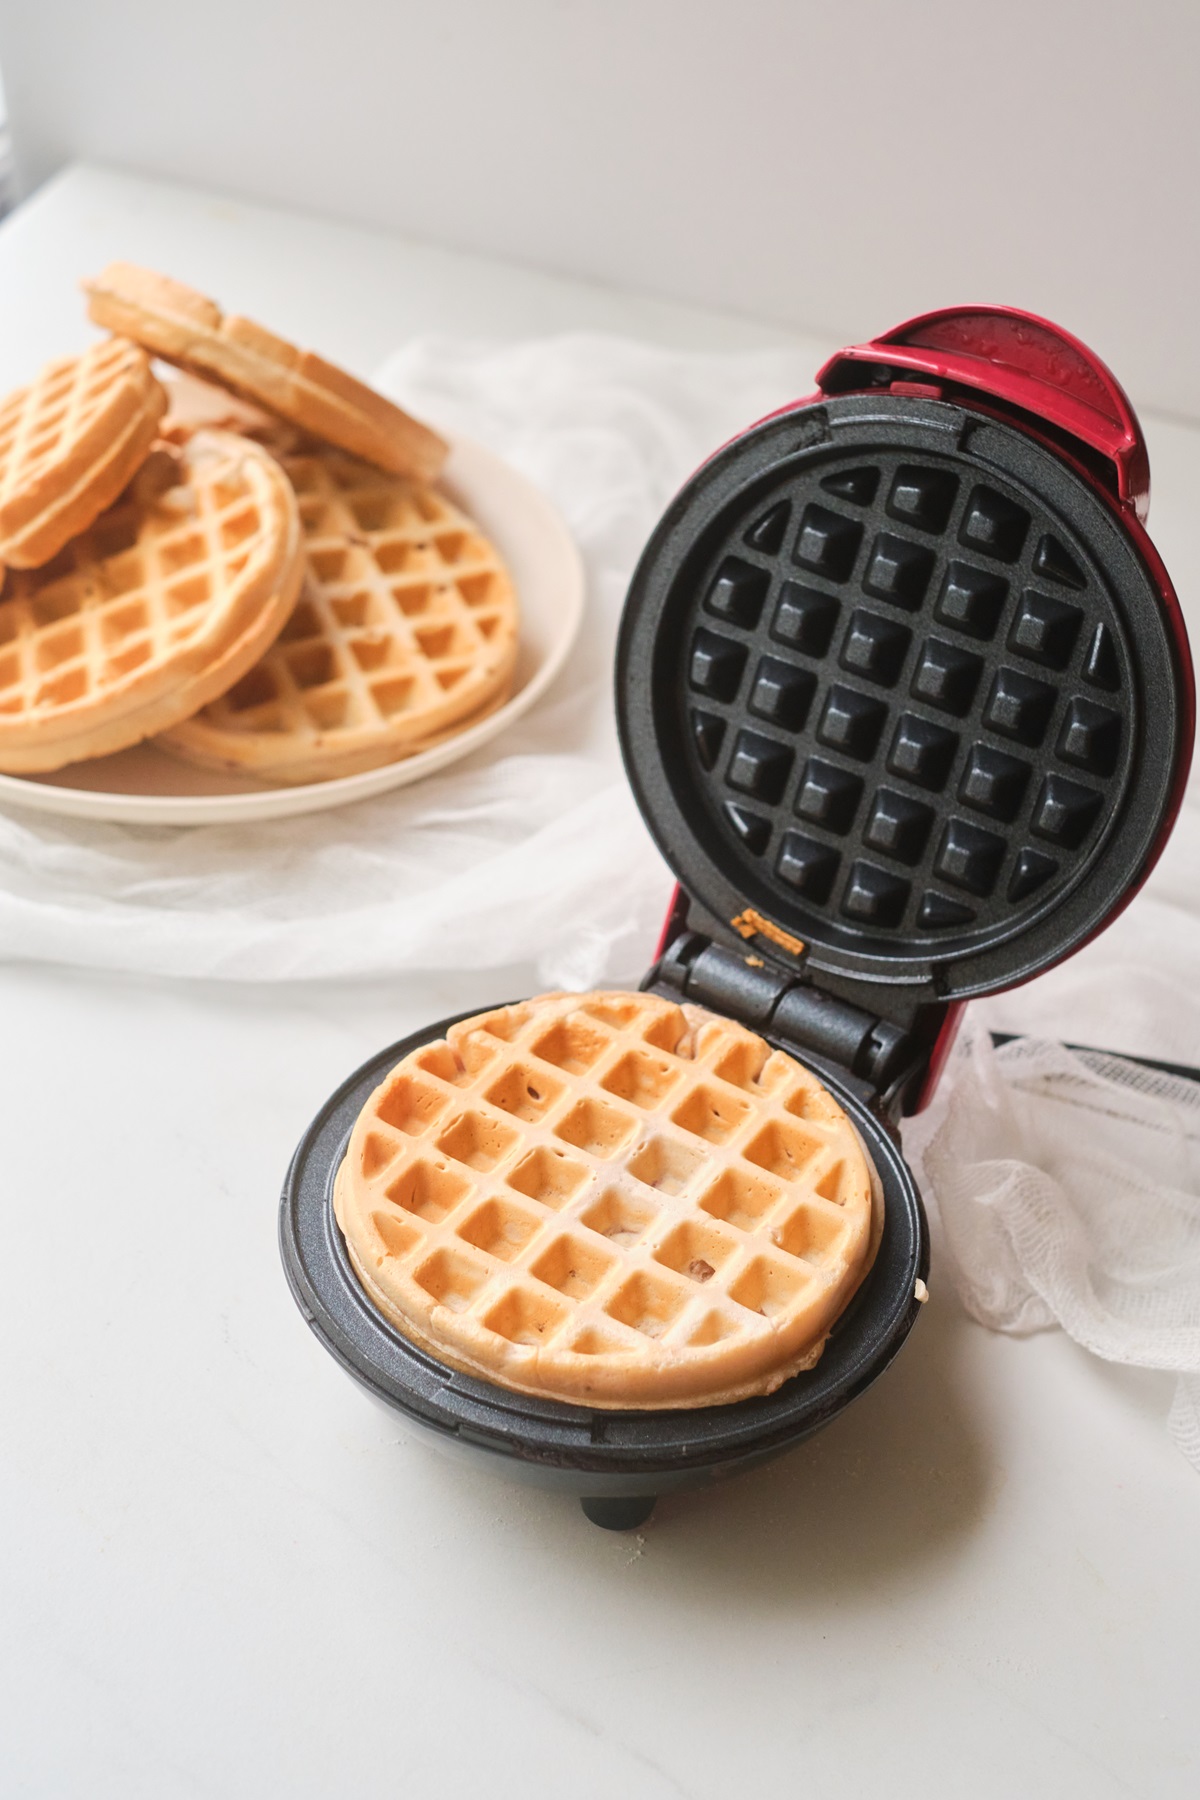 A waffle being made in a waffle iron.